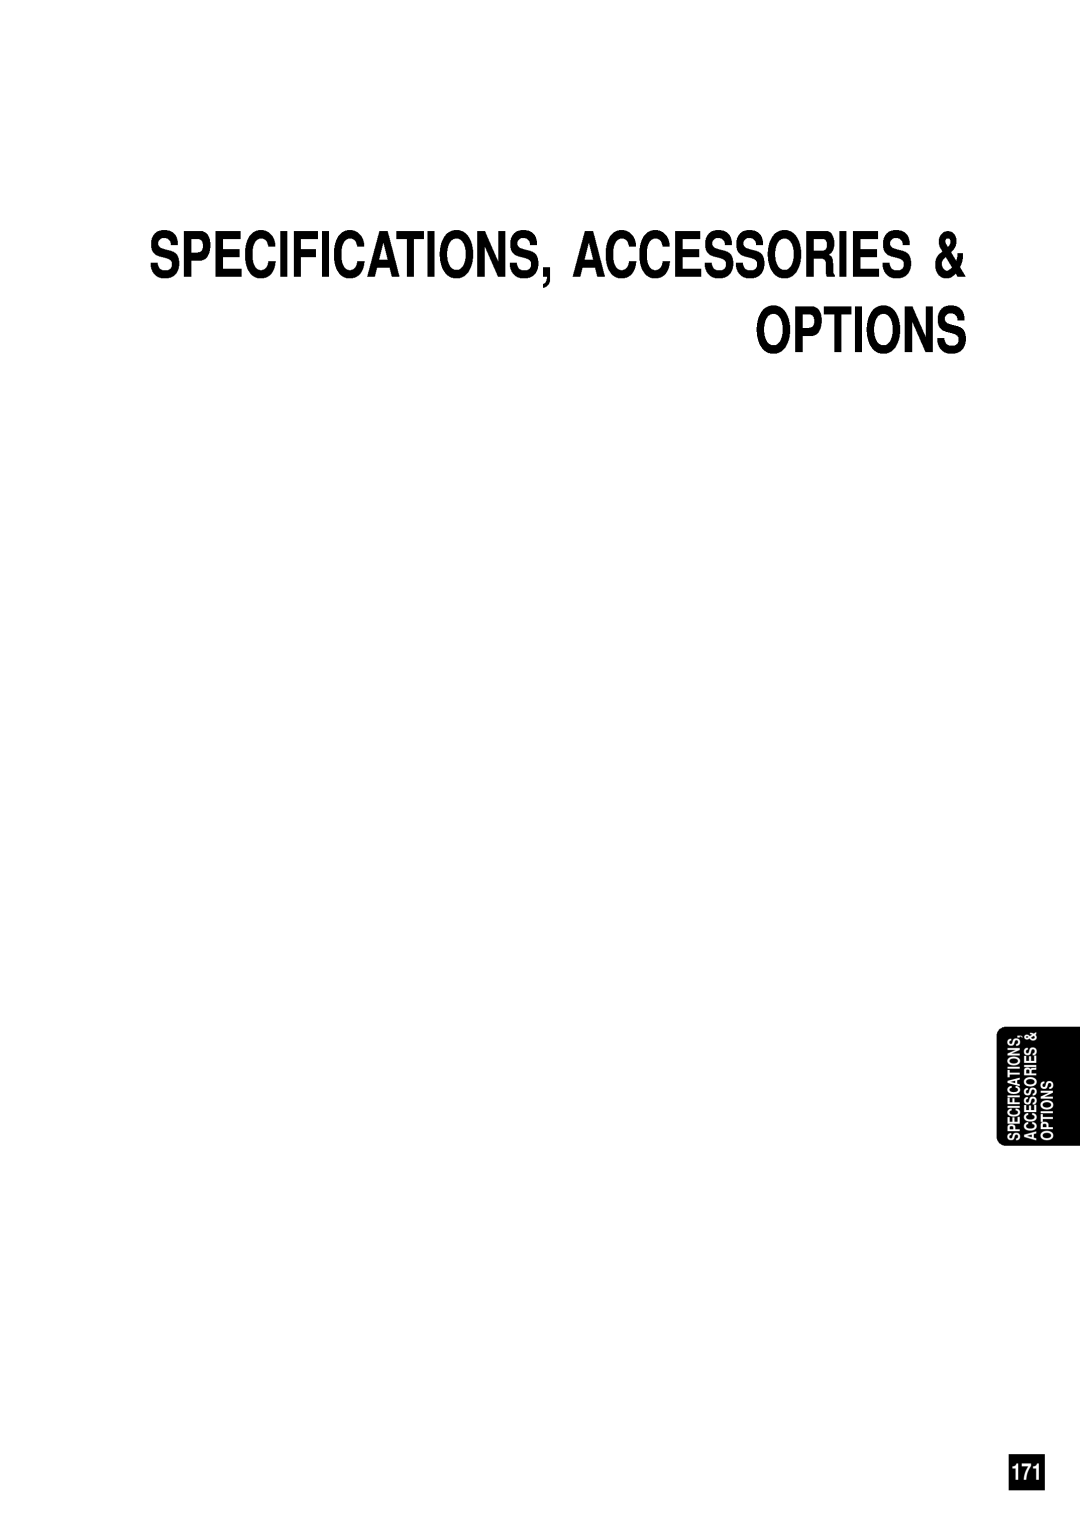 Sharp AR-650 operation manual Specifications, Accessories & Options 